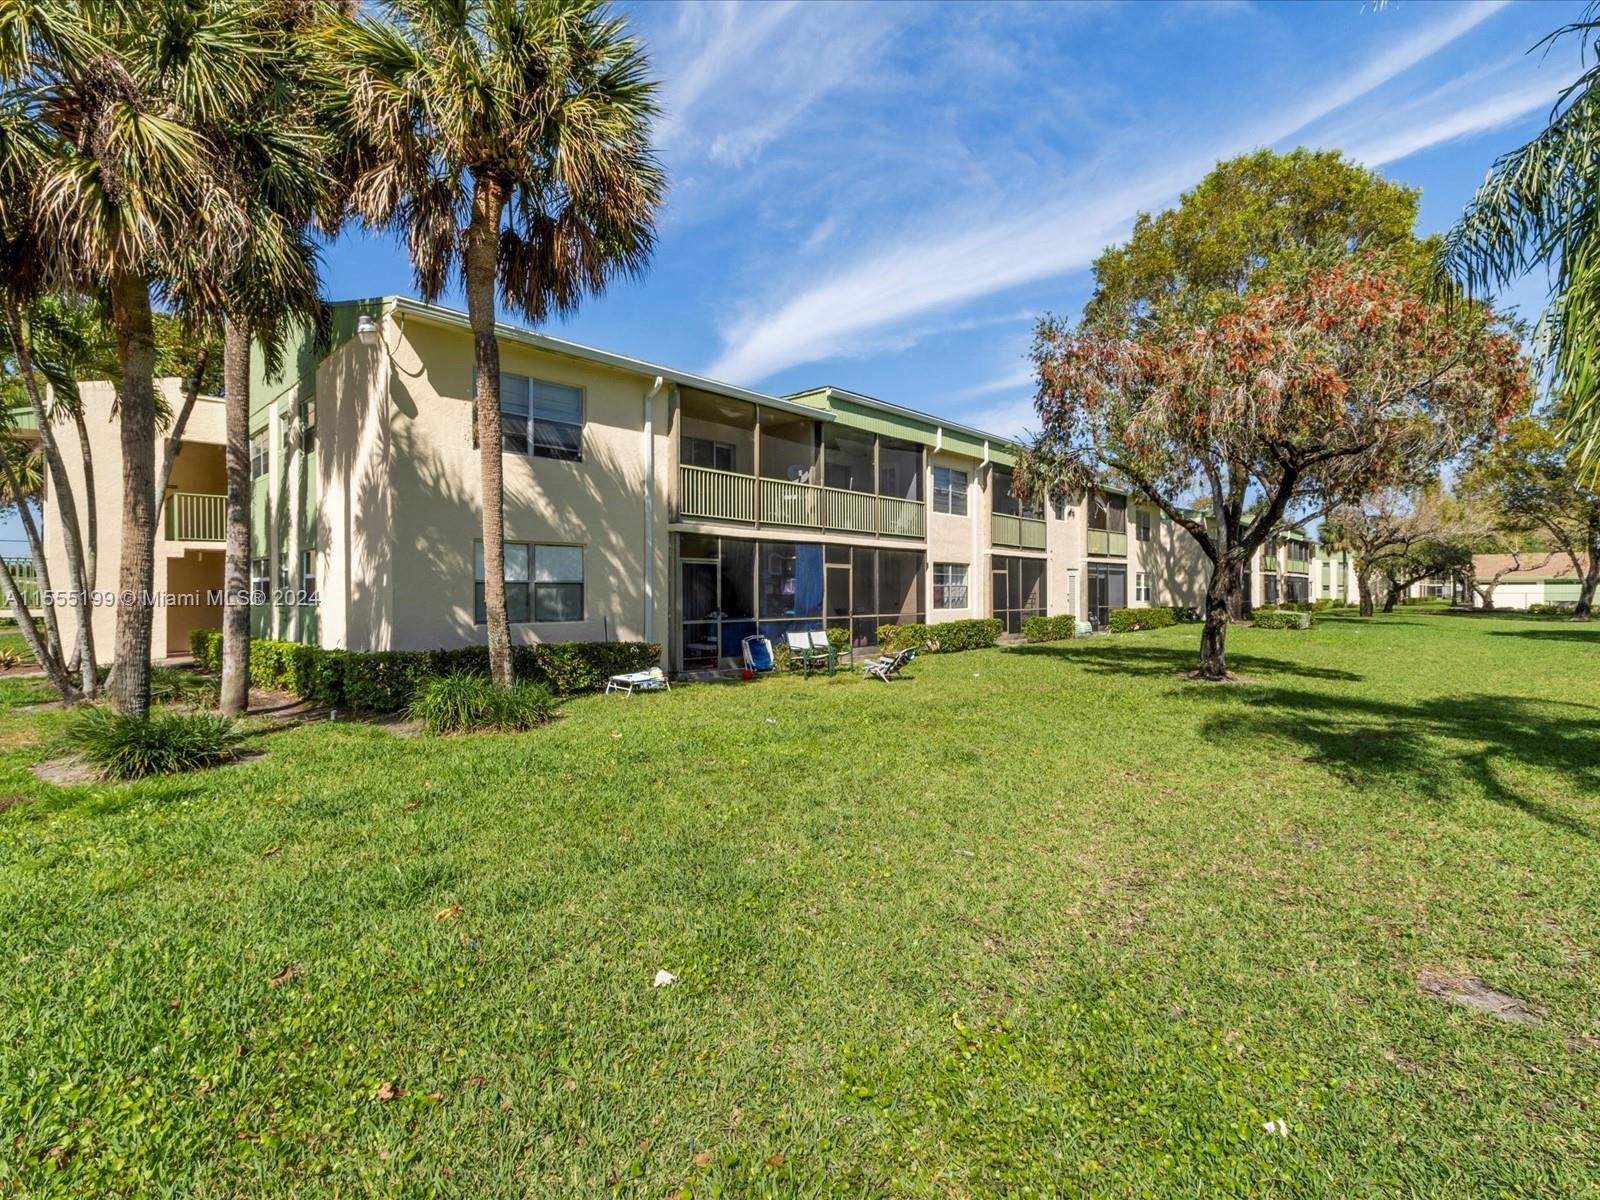 4273 Nw 89th Ave 201, Coral Springs, Broward County, Florida - 2 Bedrooms  
2 Bathrooms - 